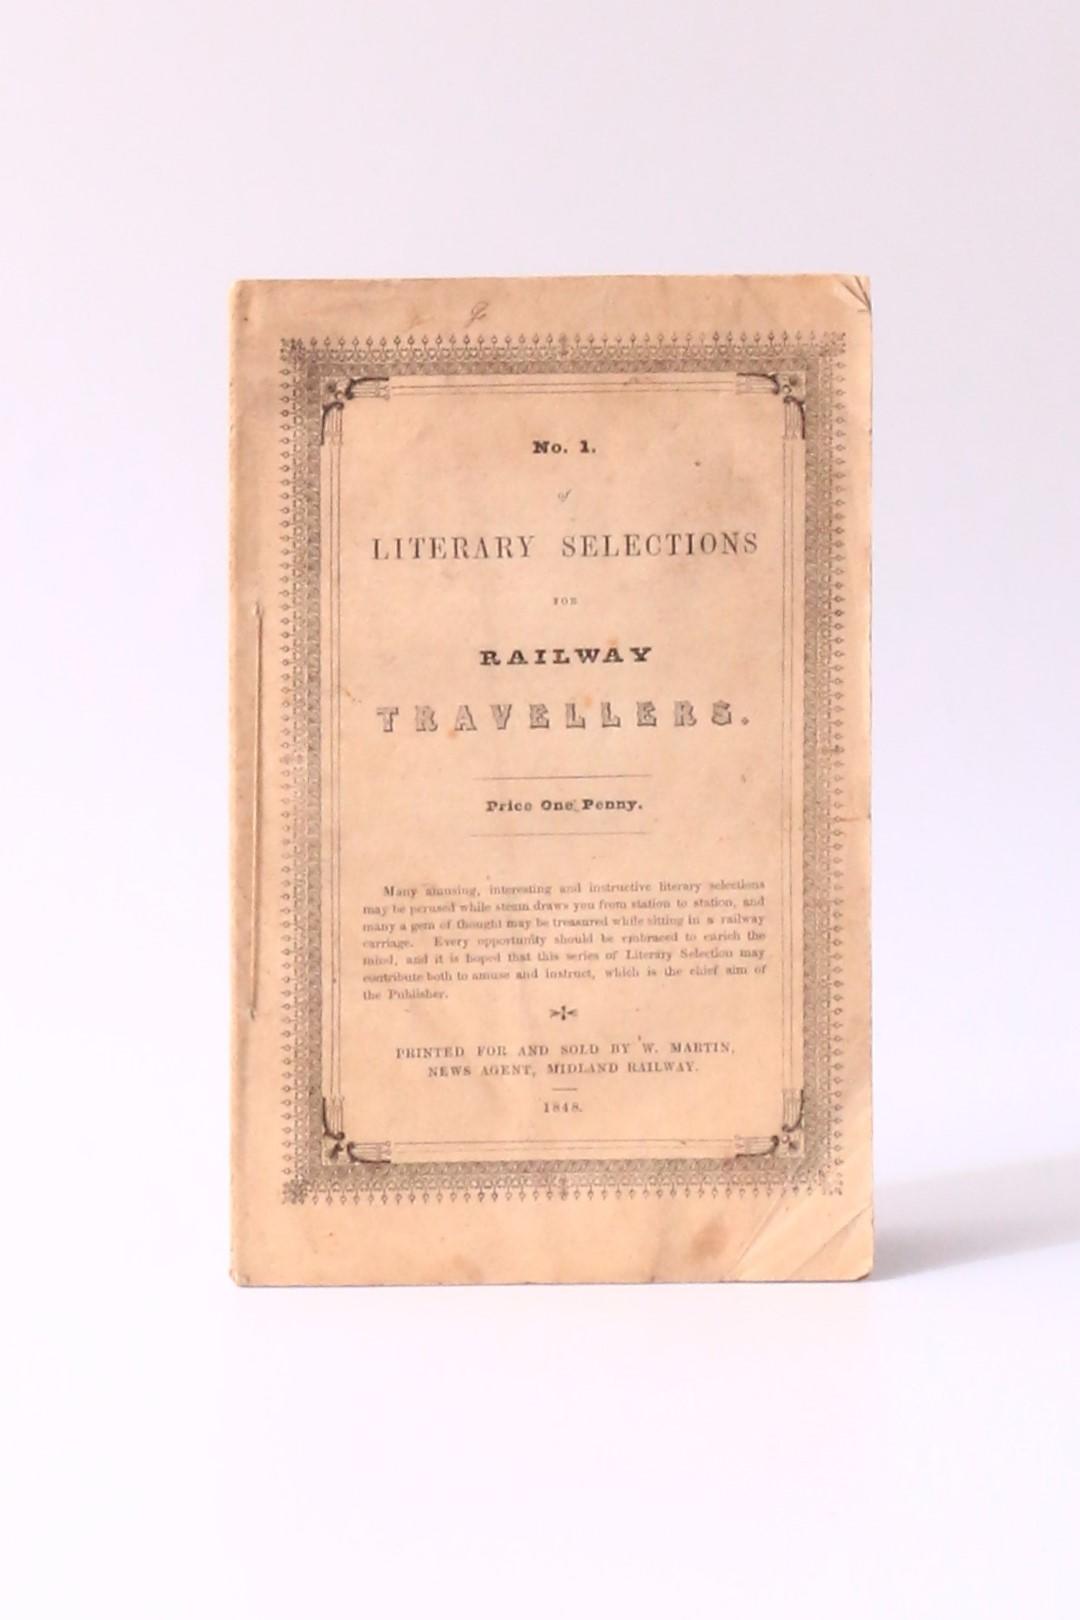 Anonymous [William Cox] - Steam' [in] No. 1. of Literary Selections for Railway Travellers - W. Martin, 1848, First Edition.